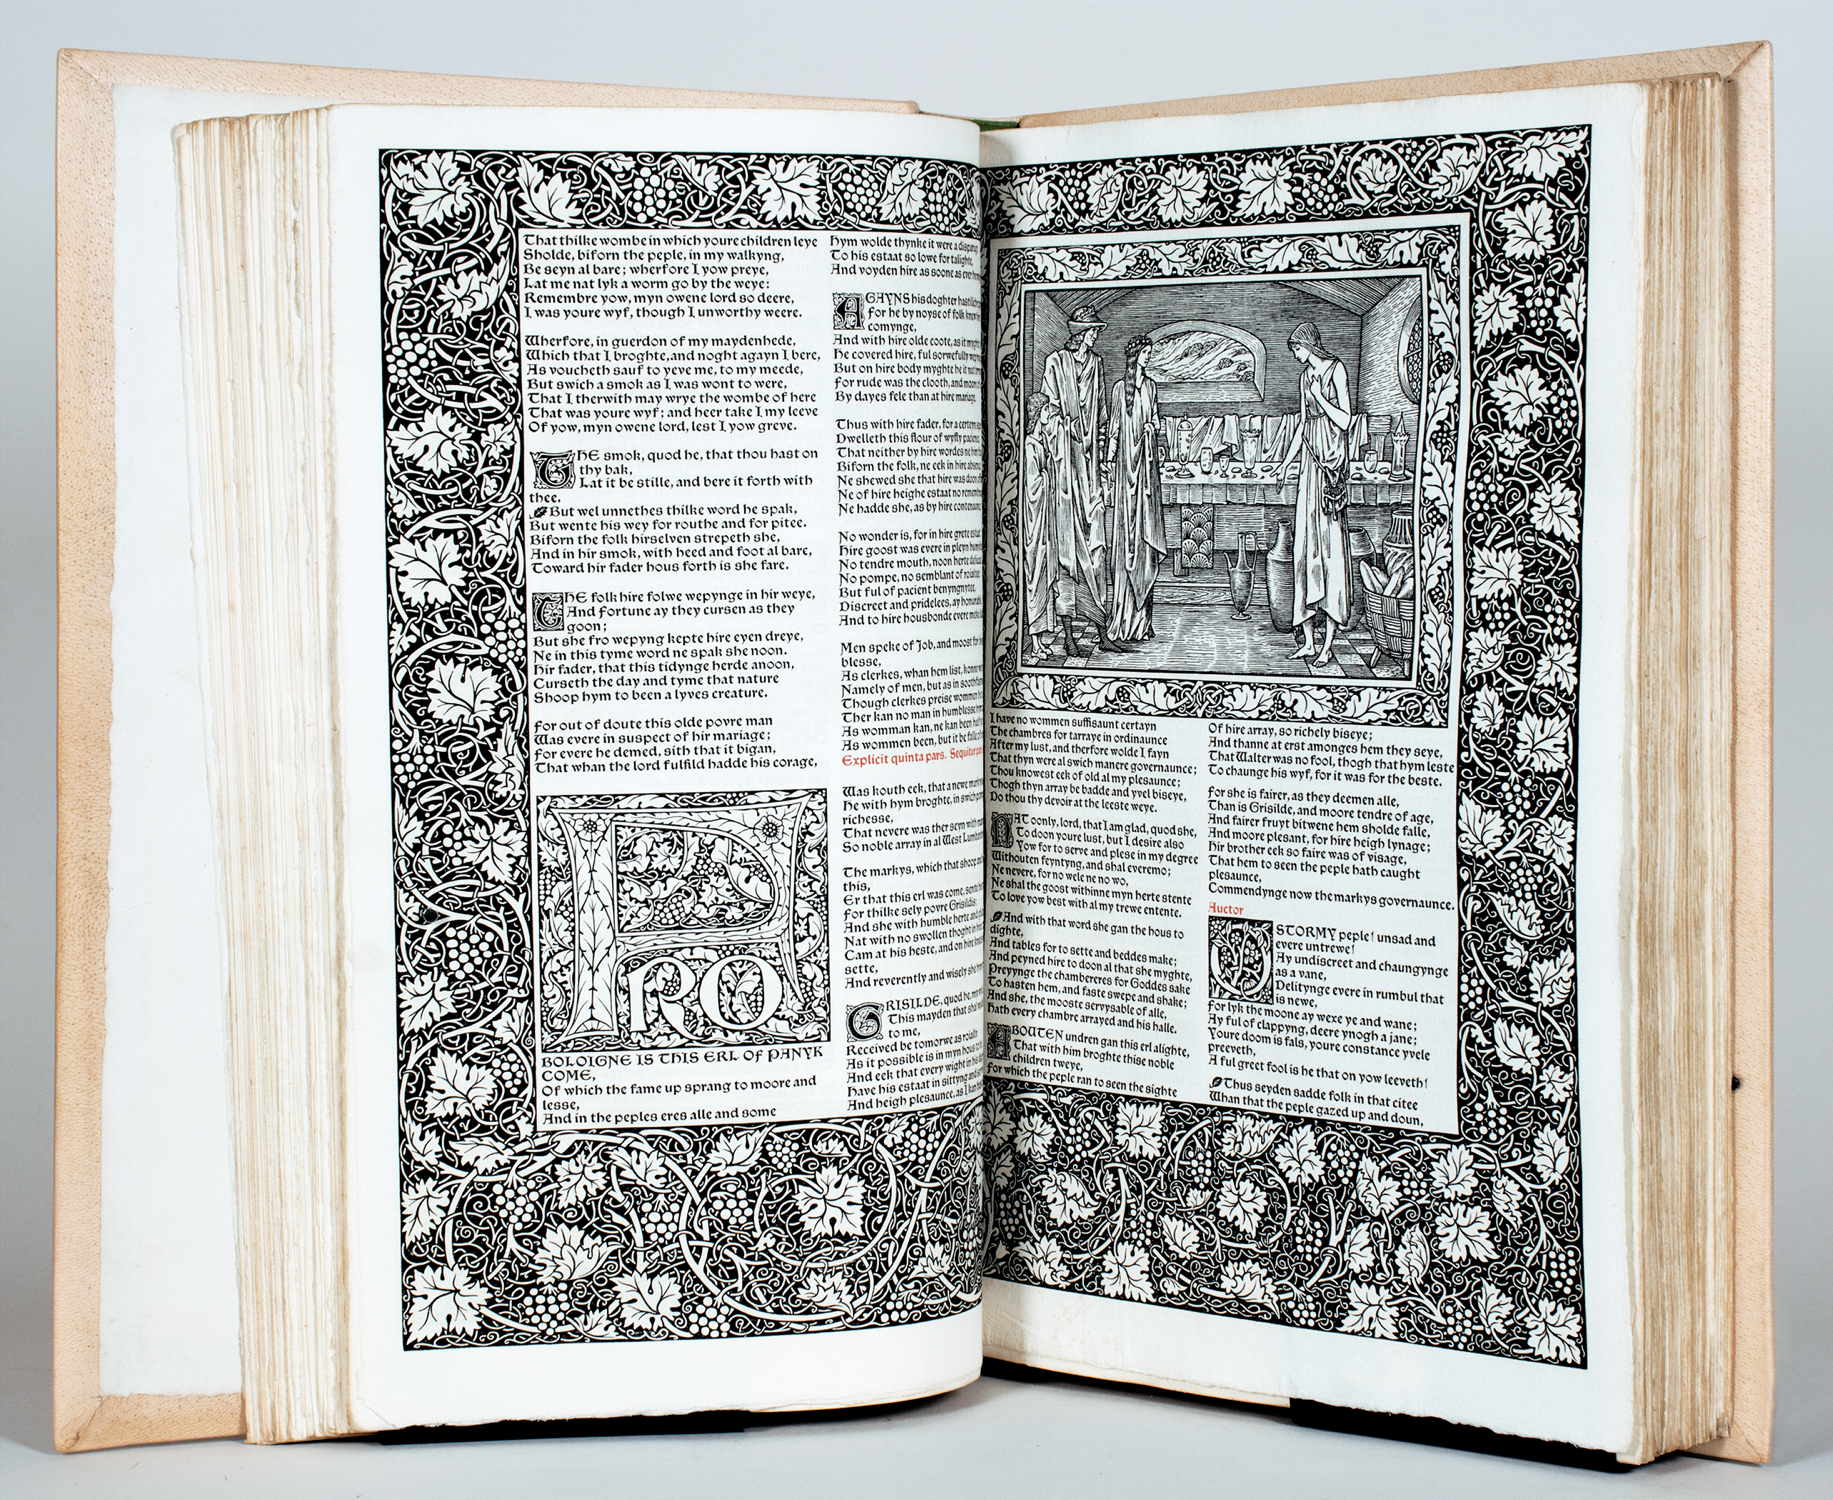 Kelmscott - Chaucer. The Works. 1896 - Image 7 of 7